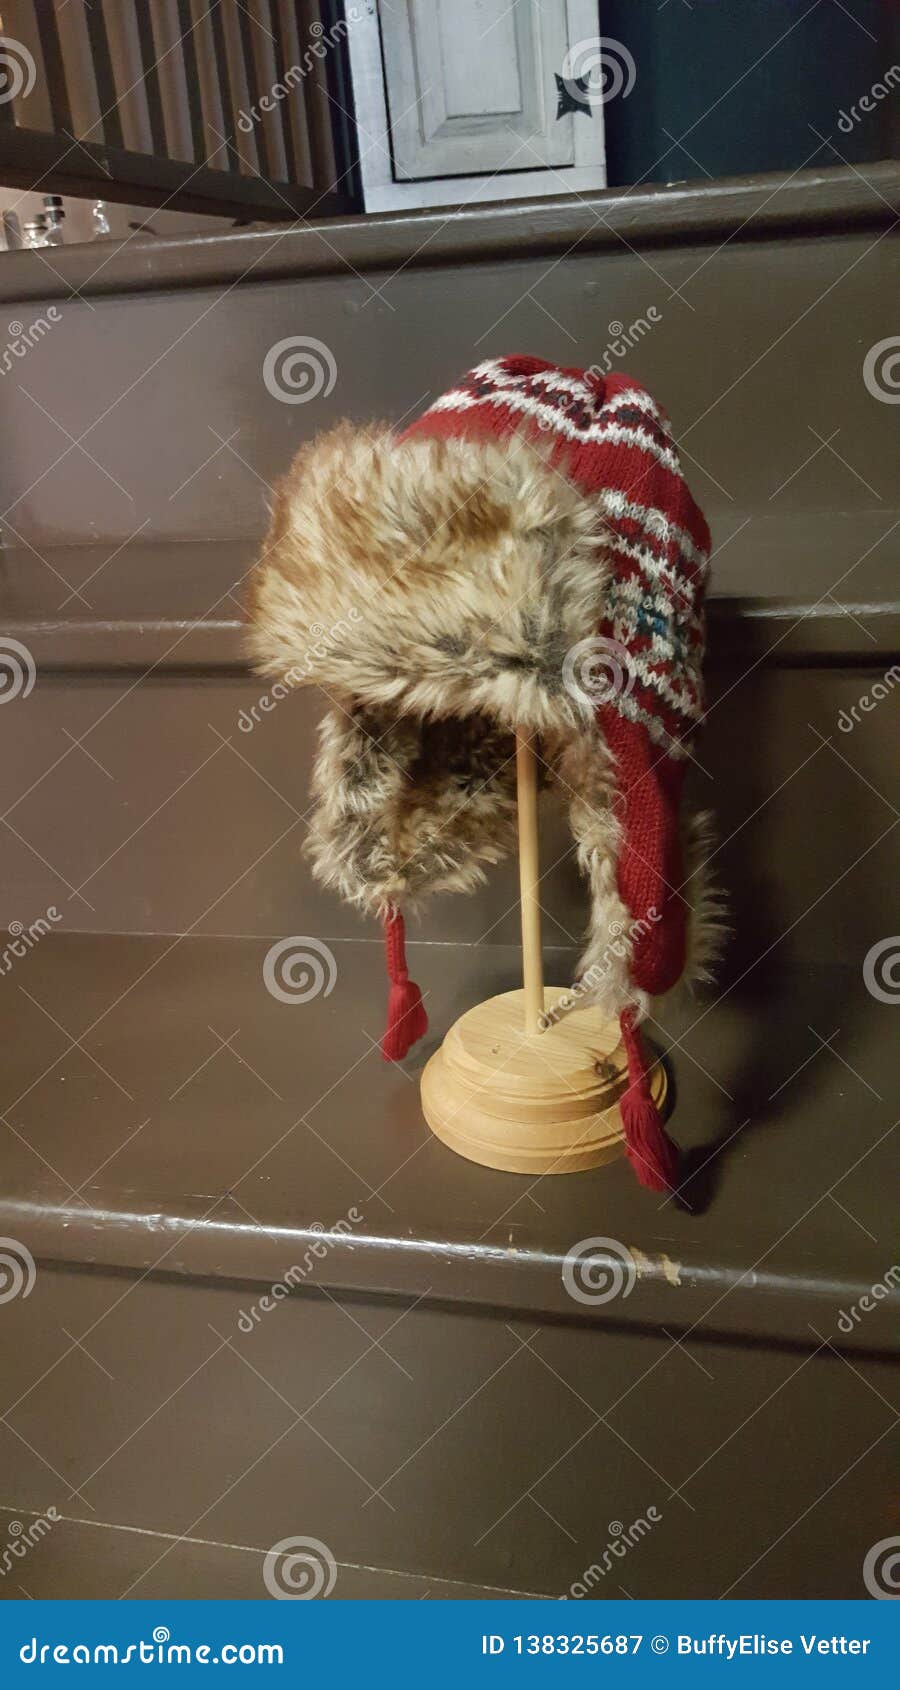 the trapper hat